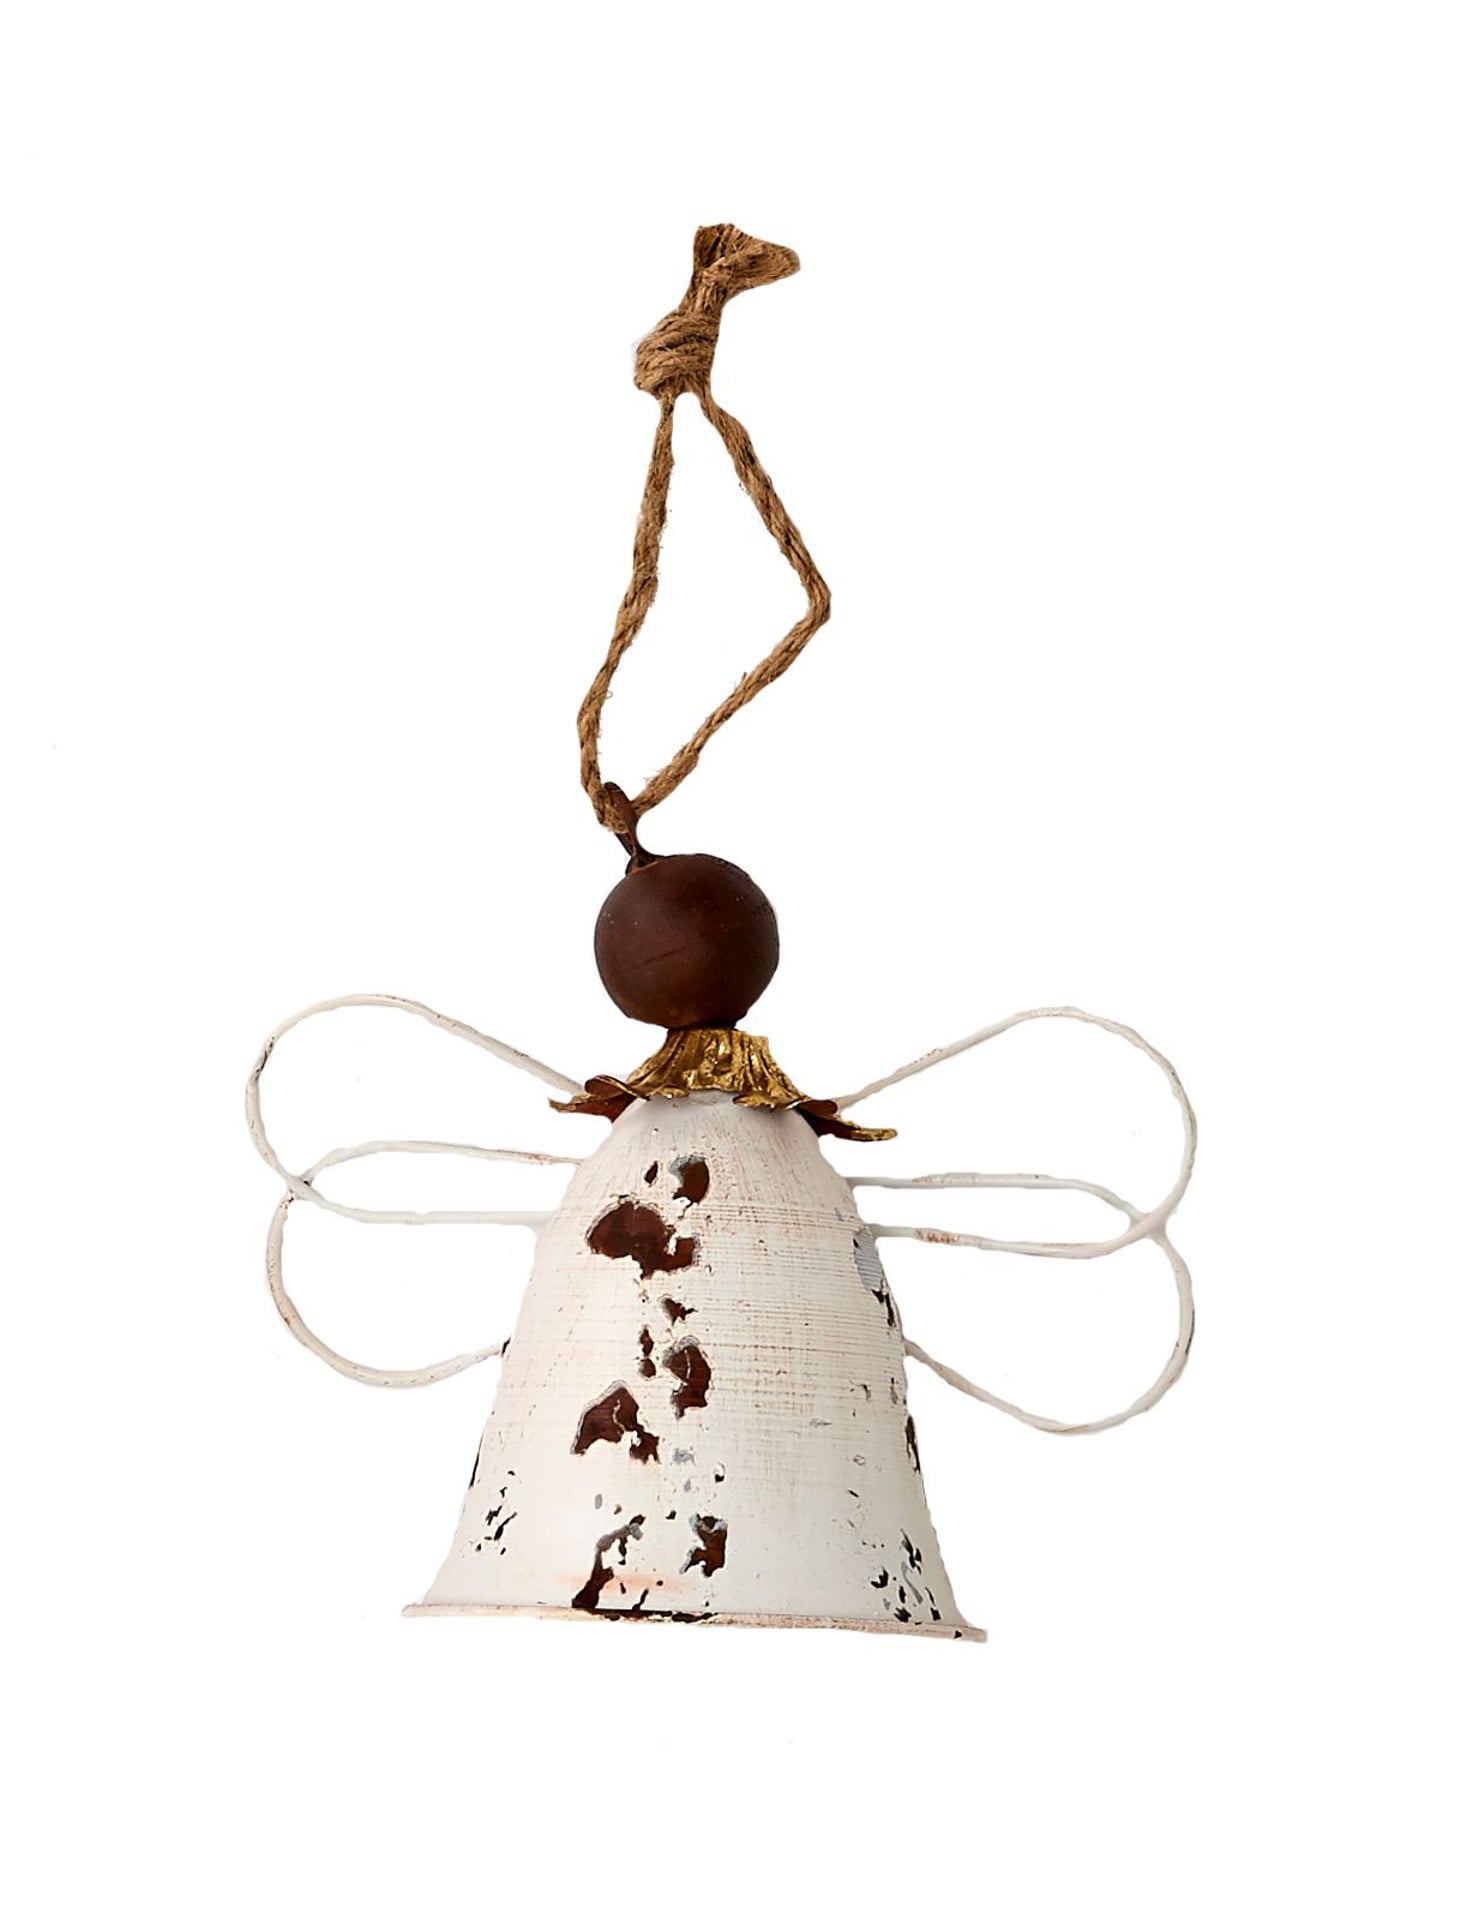 Worth Imports 10-in Decoration Bell Christmas Decor at Lowes.com